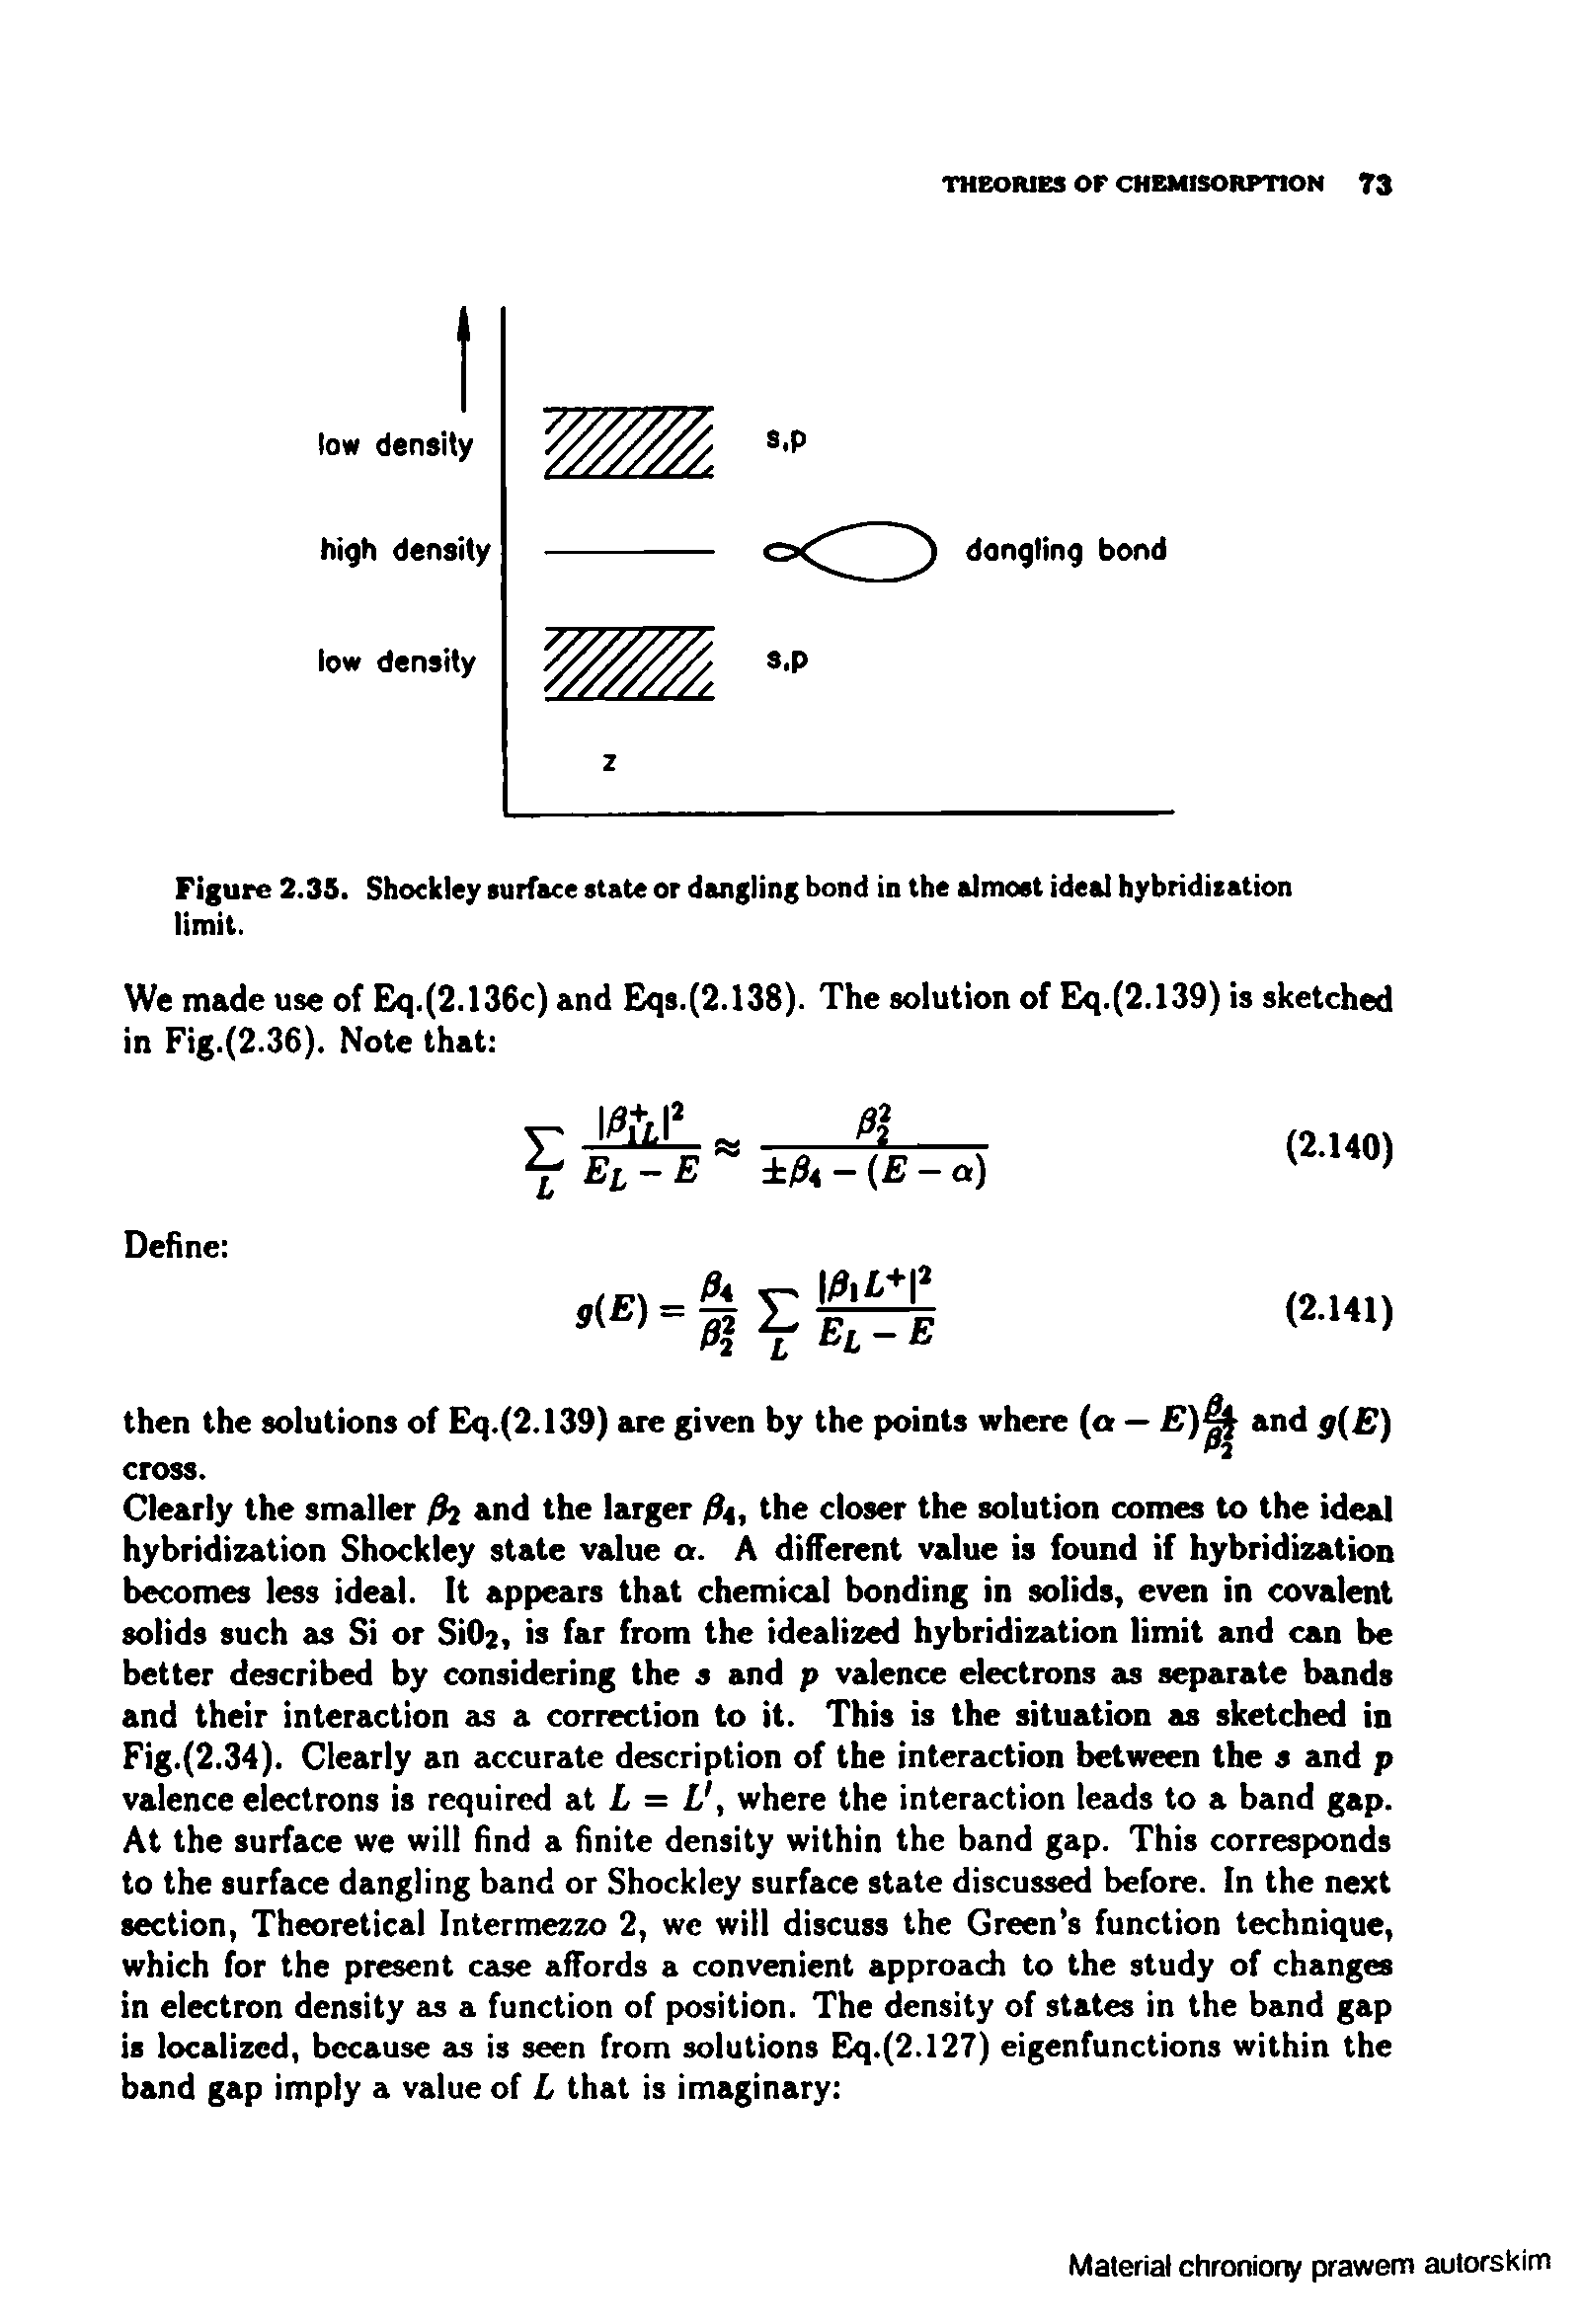 Figure 2.35. Shockley surface state or dangling bond in the almost ideal hybridisation limit.